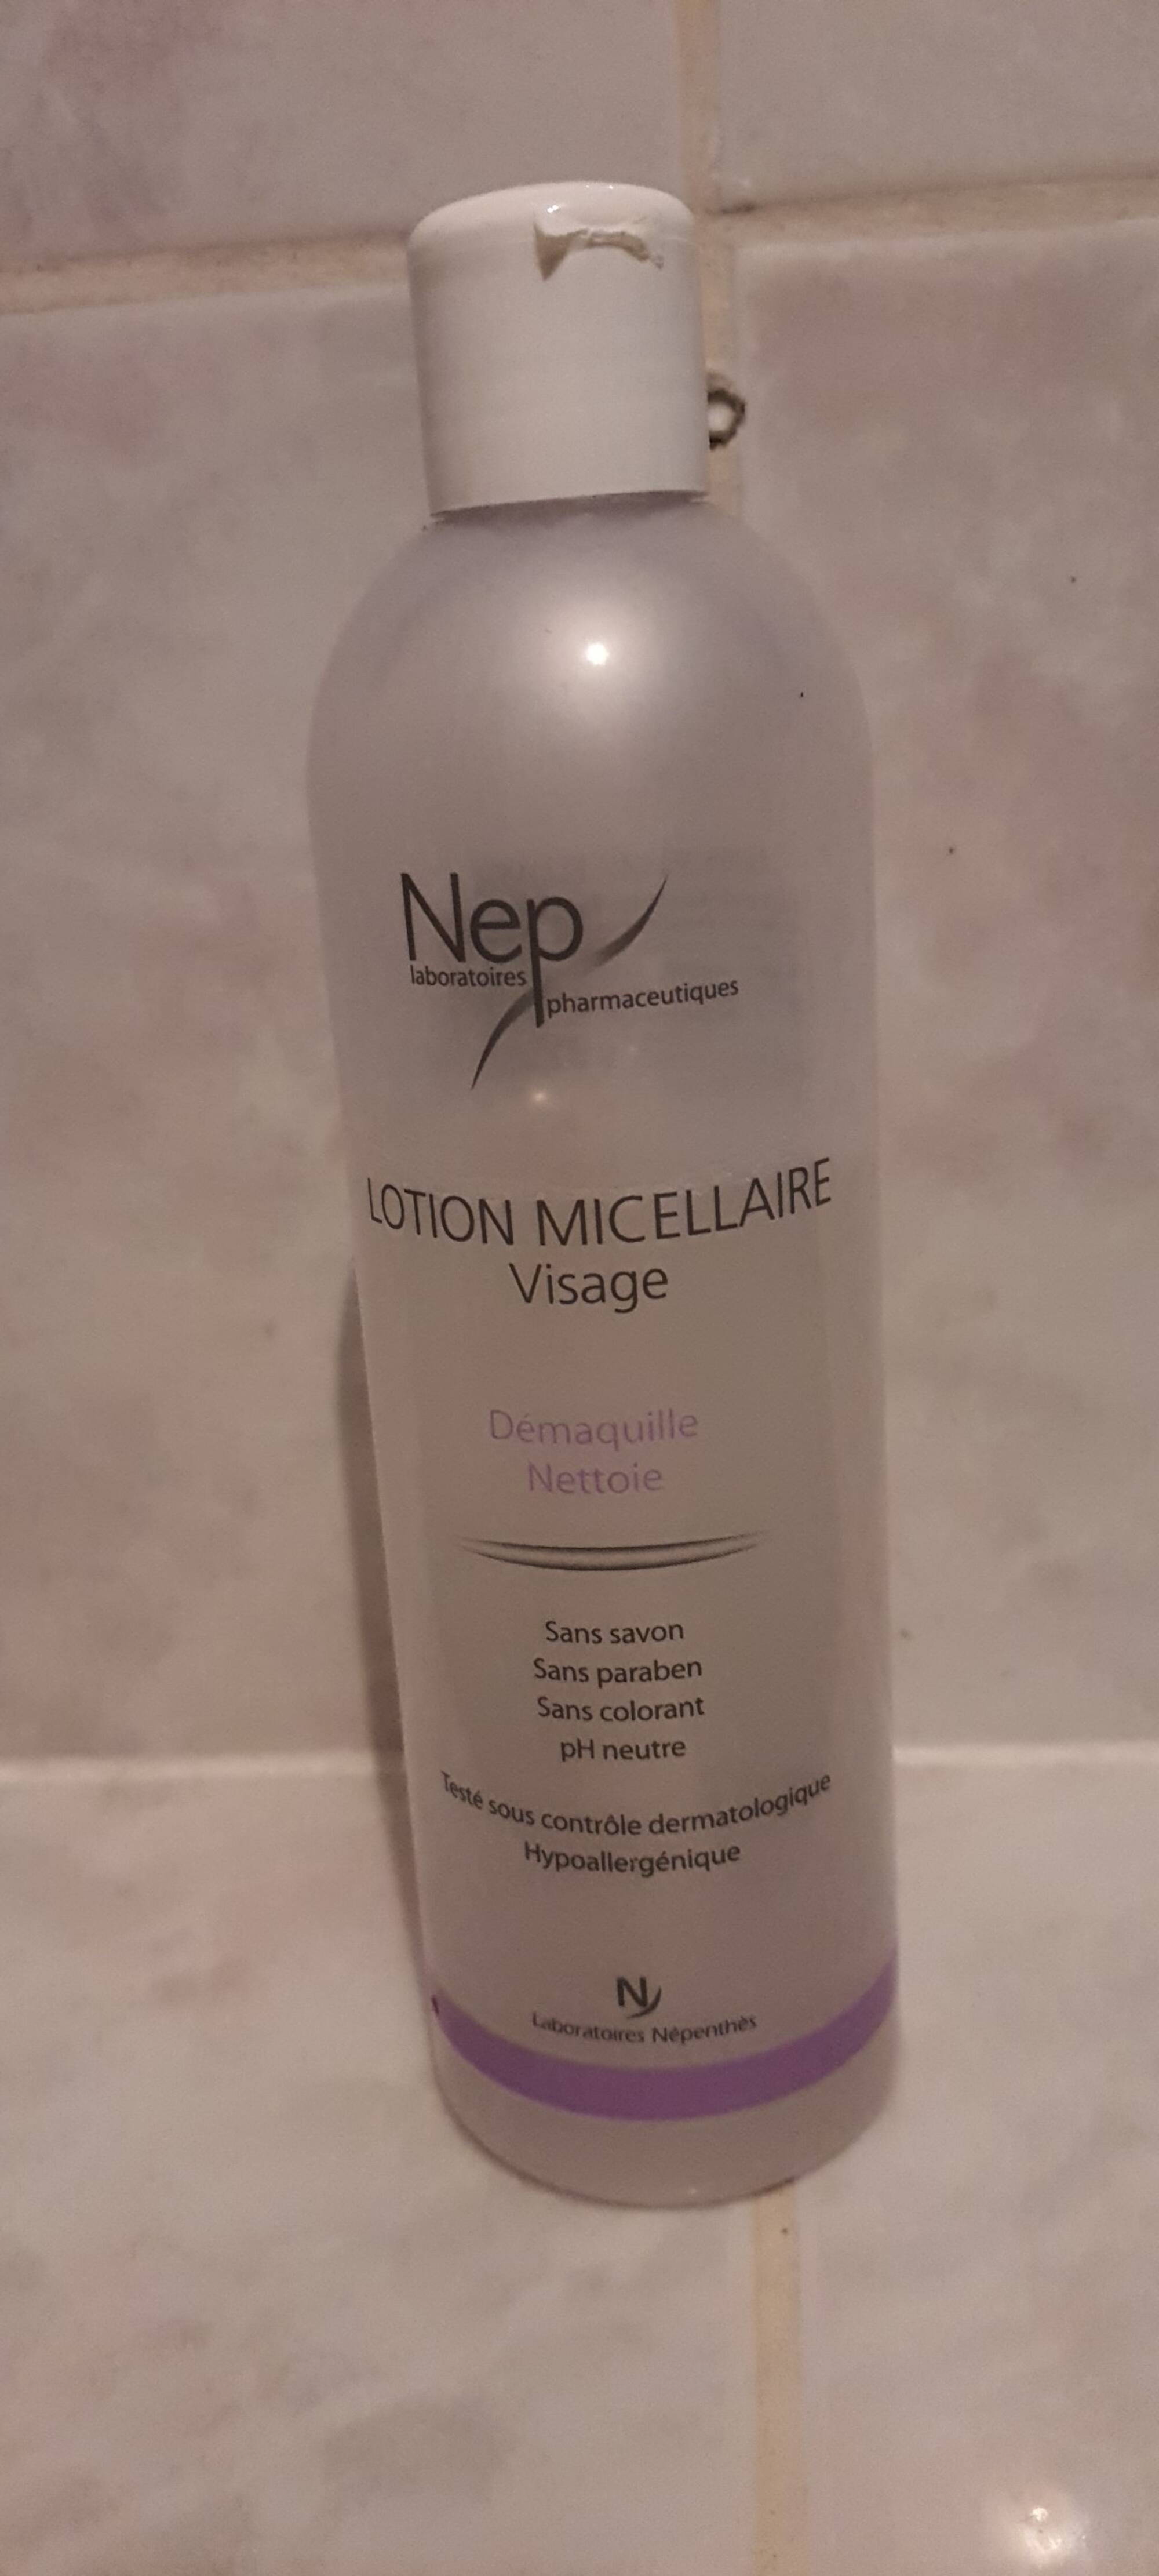 NEP - Lotion micellaire visage